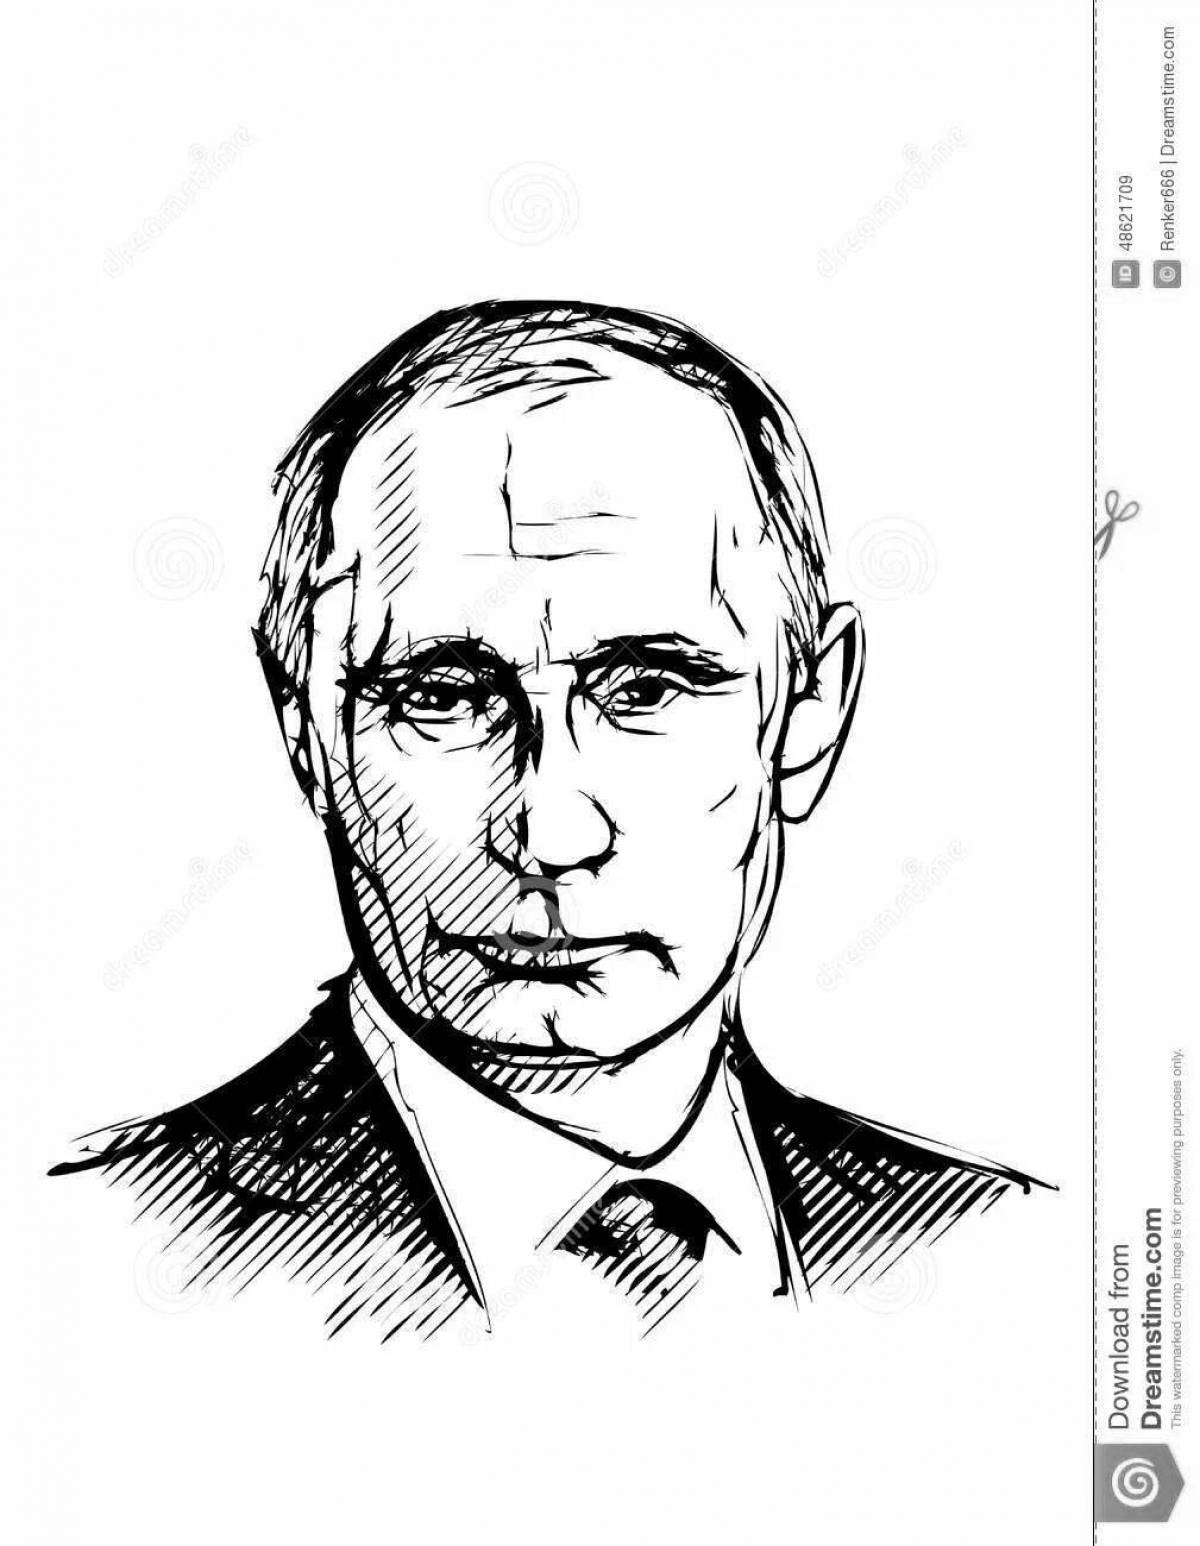 Merry Putin coloring book for children